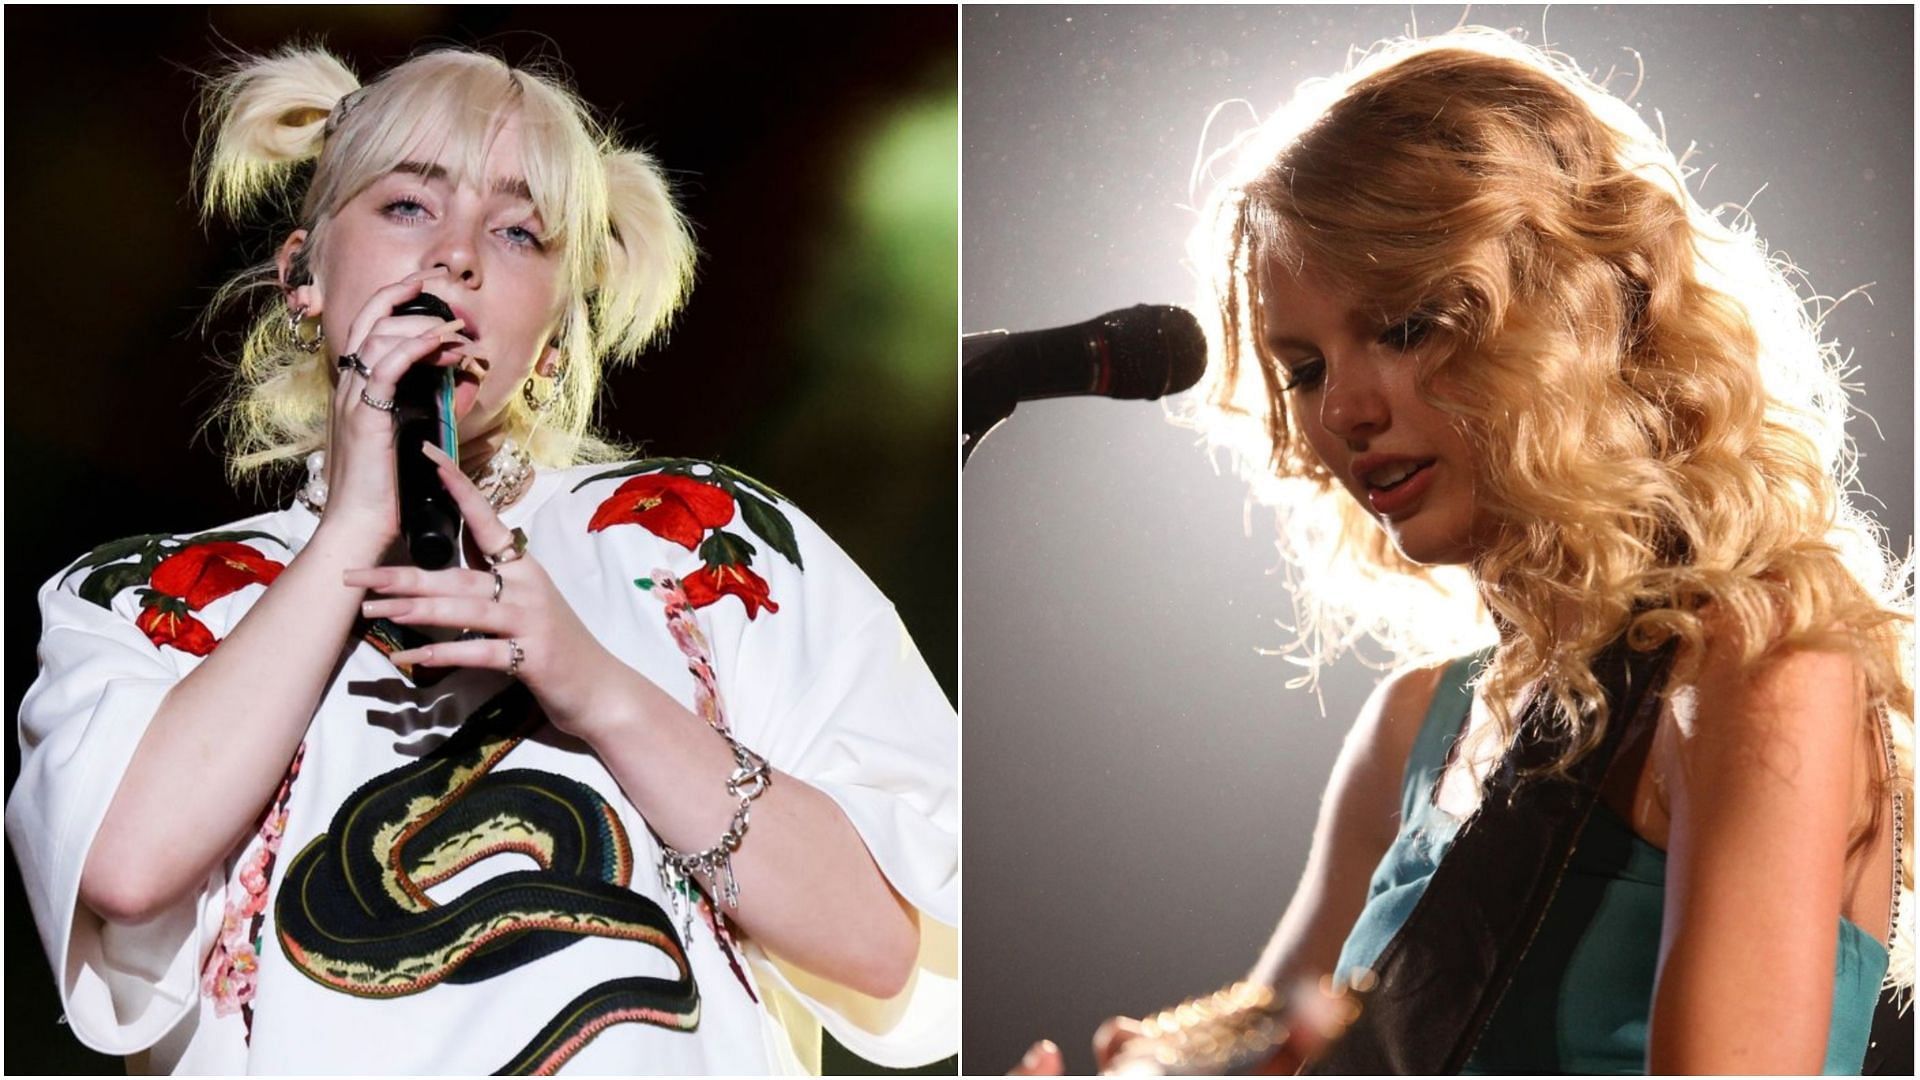 Billie Eilish and Taylor Swift have criticised SC&#039;s ruling overturning Roe Vs Wade. (Images via Getty and Instagram)